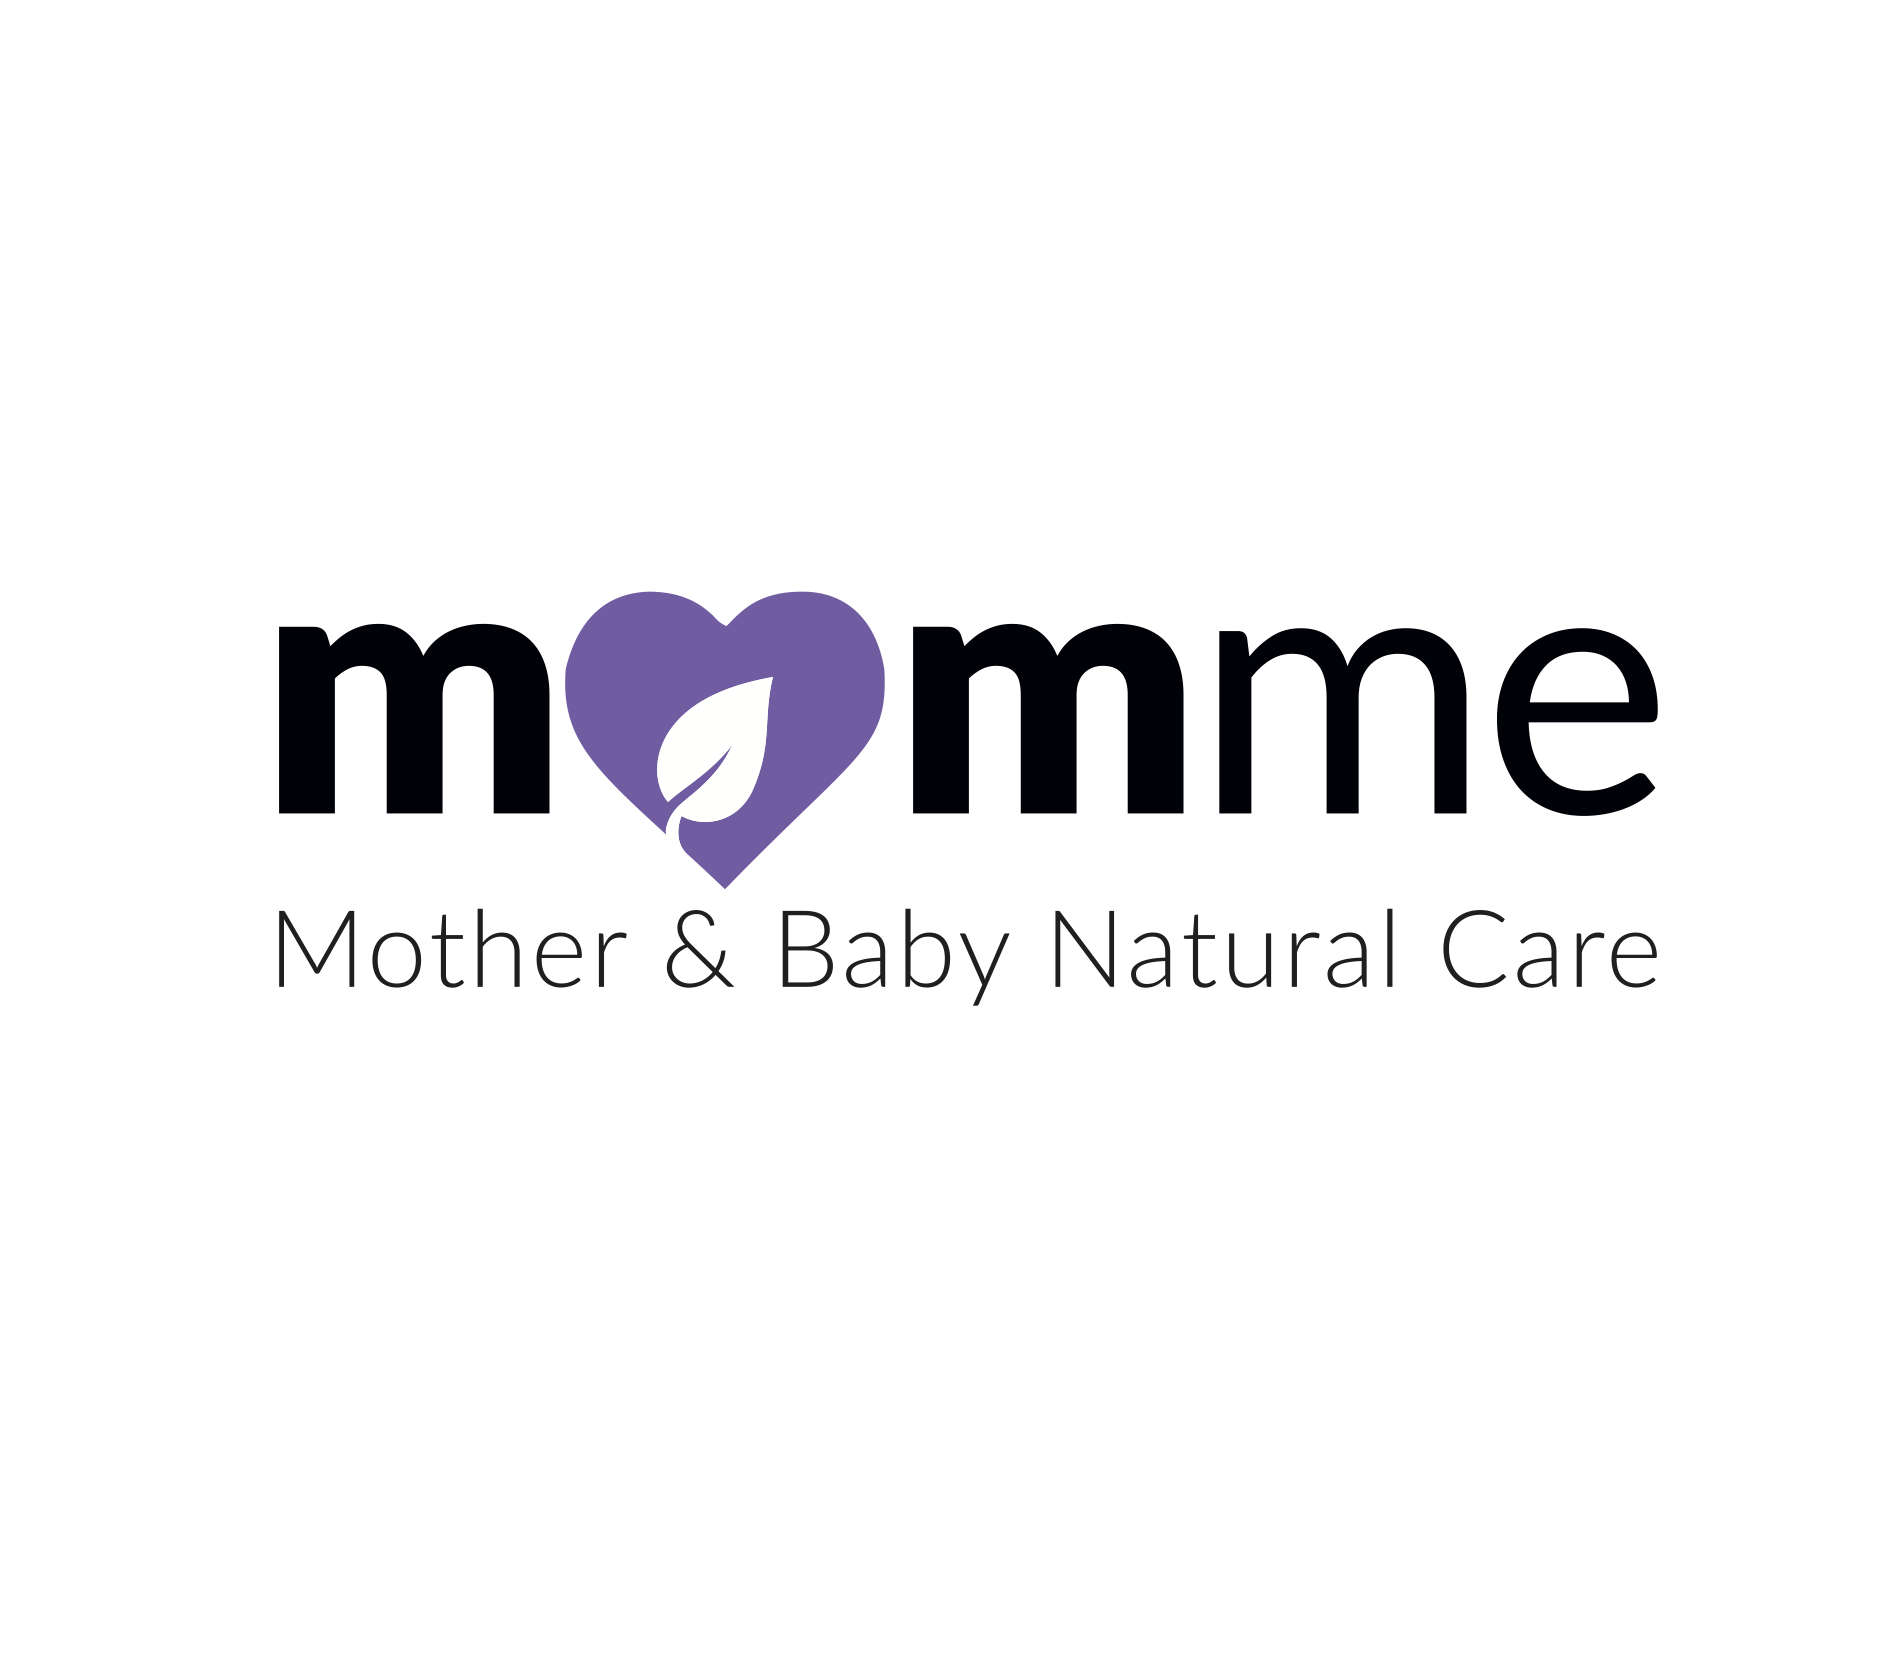 Mom.me Logo - MomMe | HEBE.pl